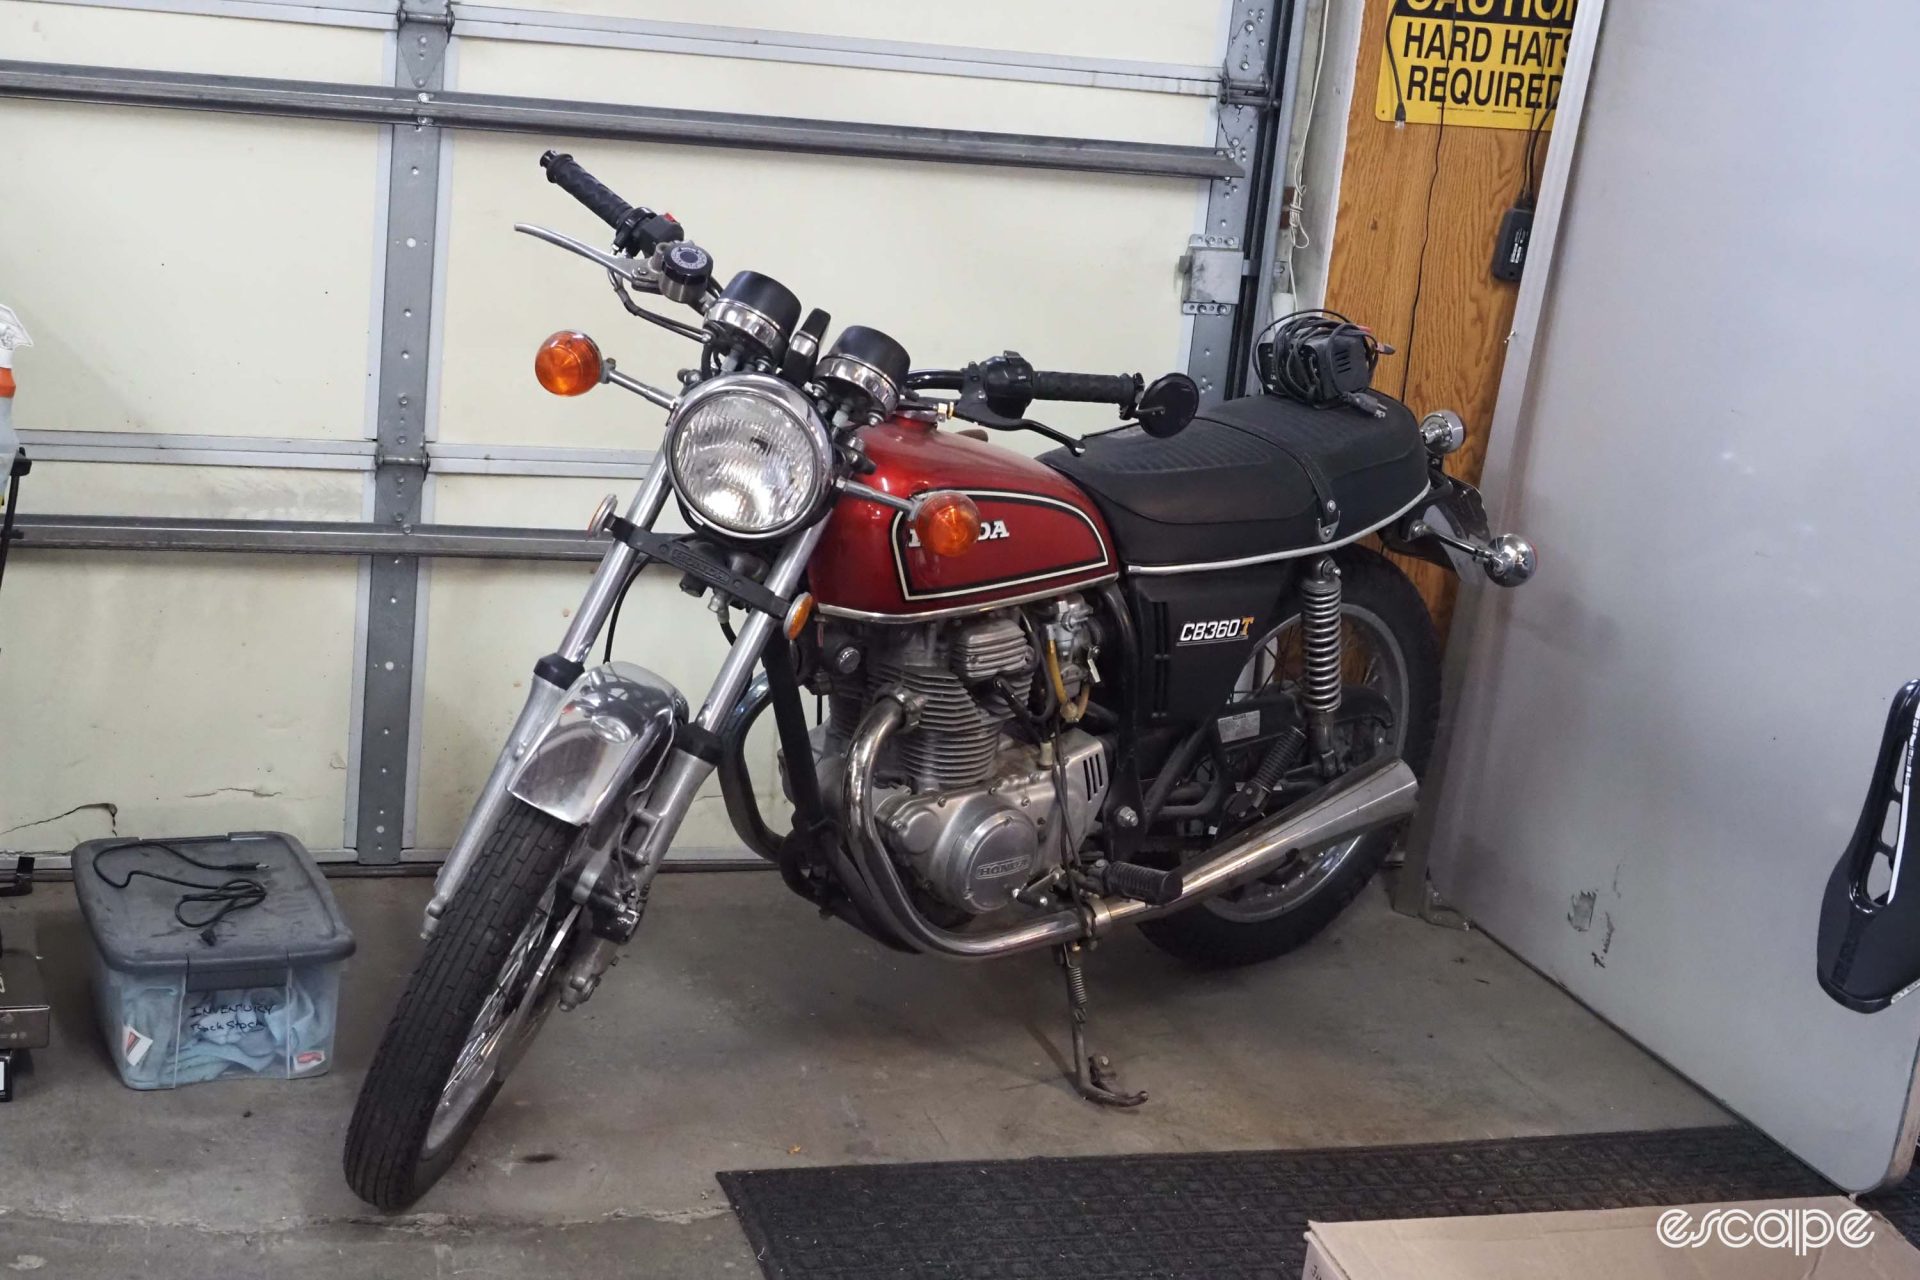 A Honda CB360 motorcycle sits in a corner of the shop.